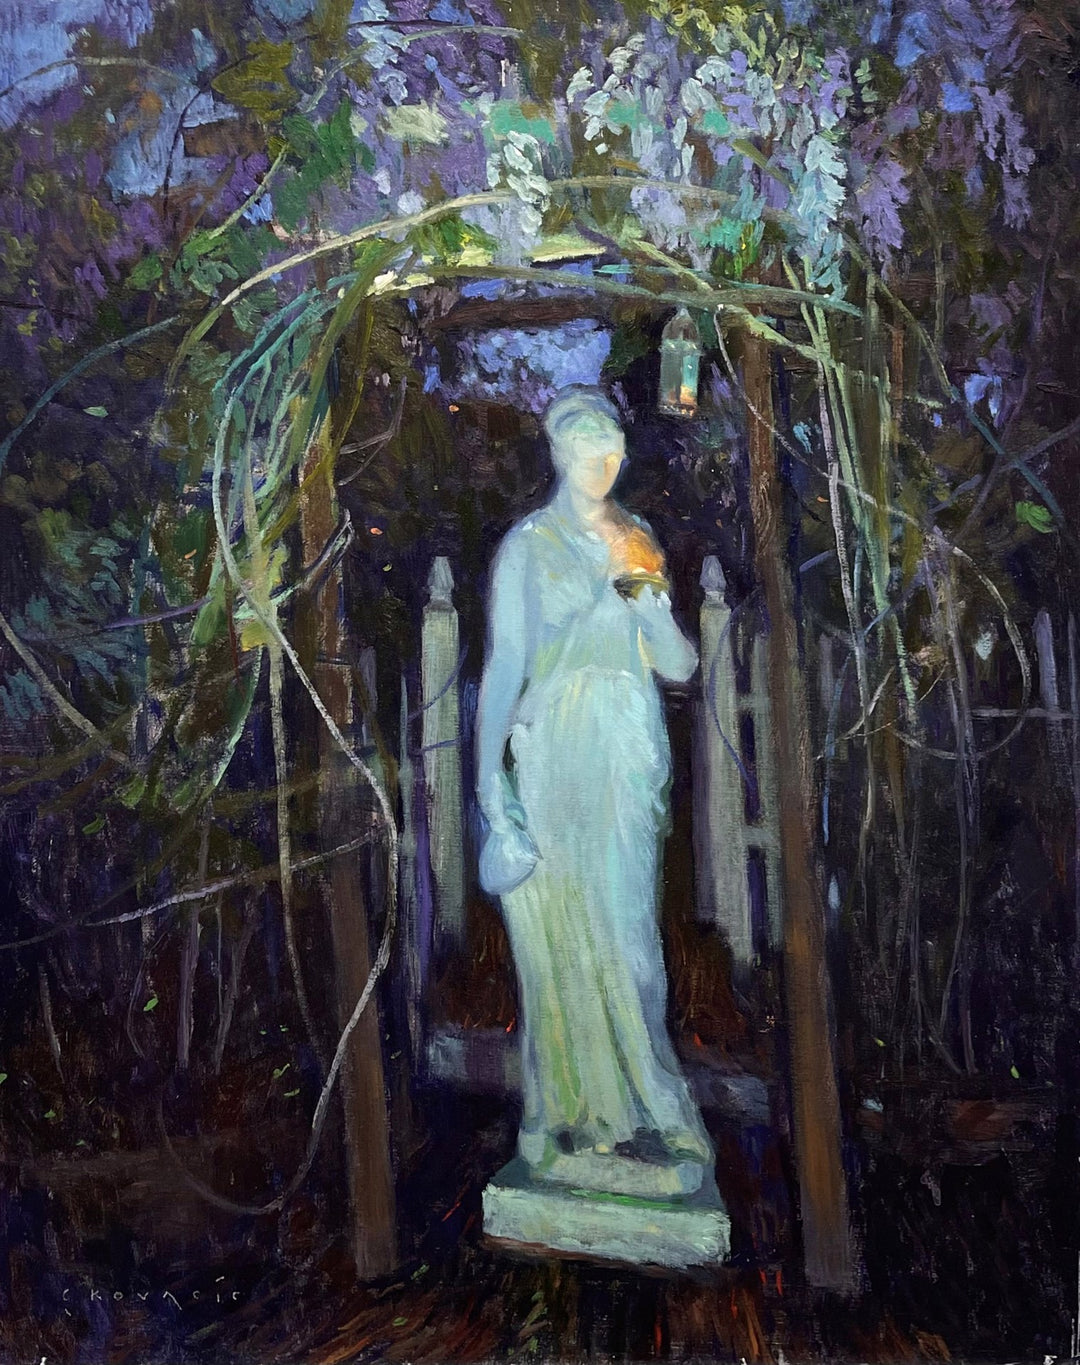 She Who Is Guardian, Hebe at the Gate, 2022" by Chuck Kovacic - a captivating painting capturing the essence of She Who Is Guardian, as she stands gracefully amidst lush garden surroundings.